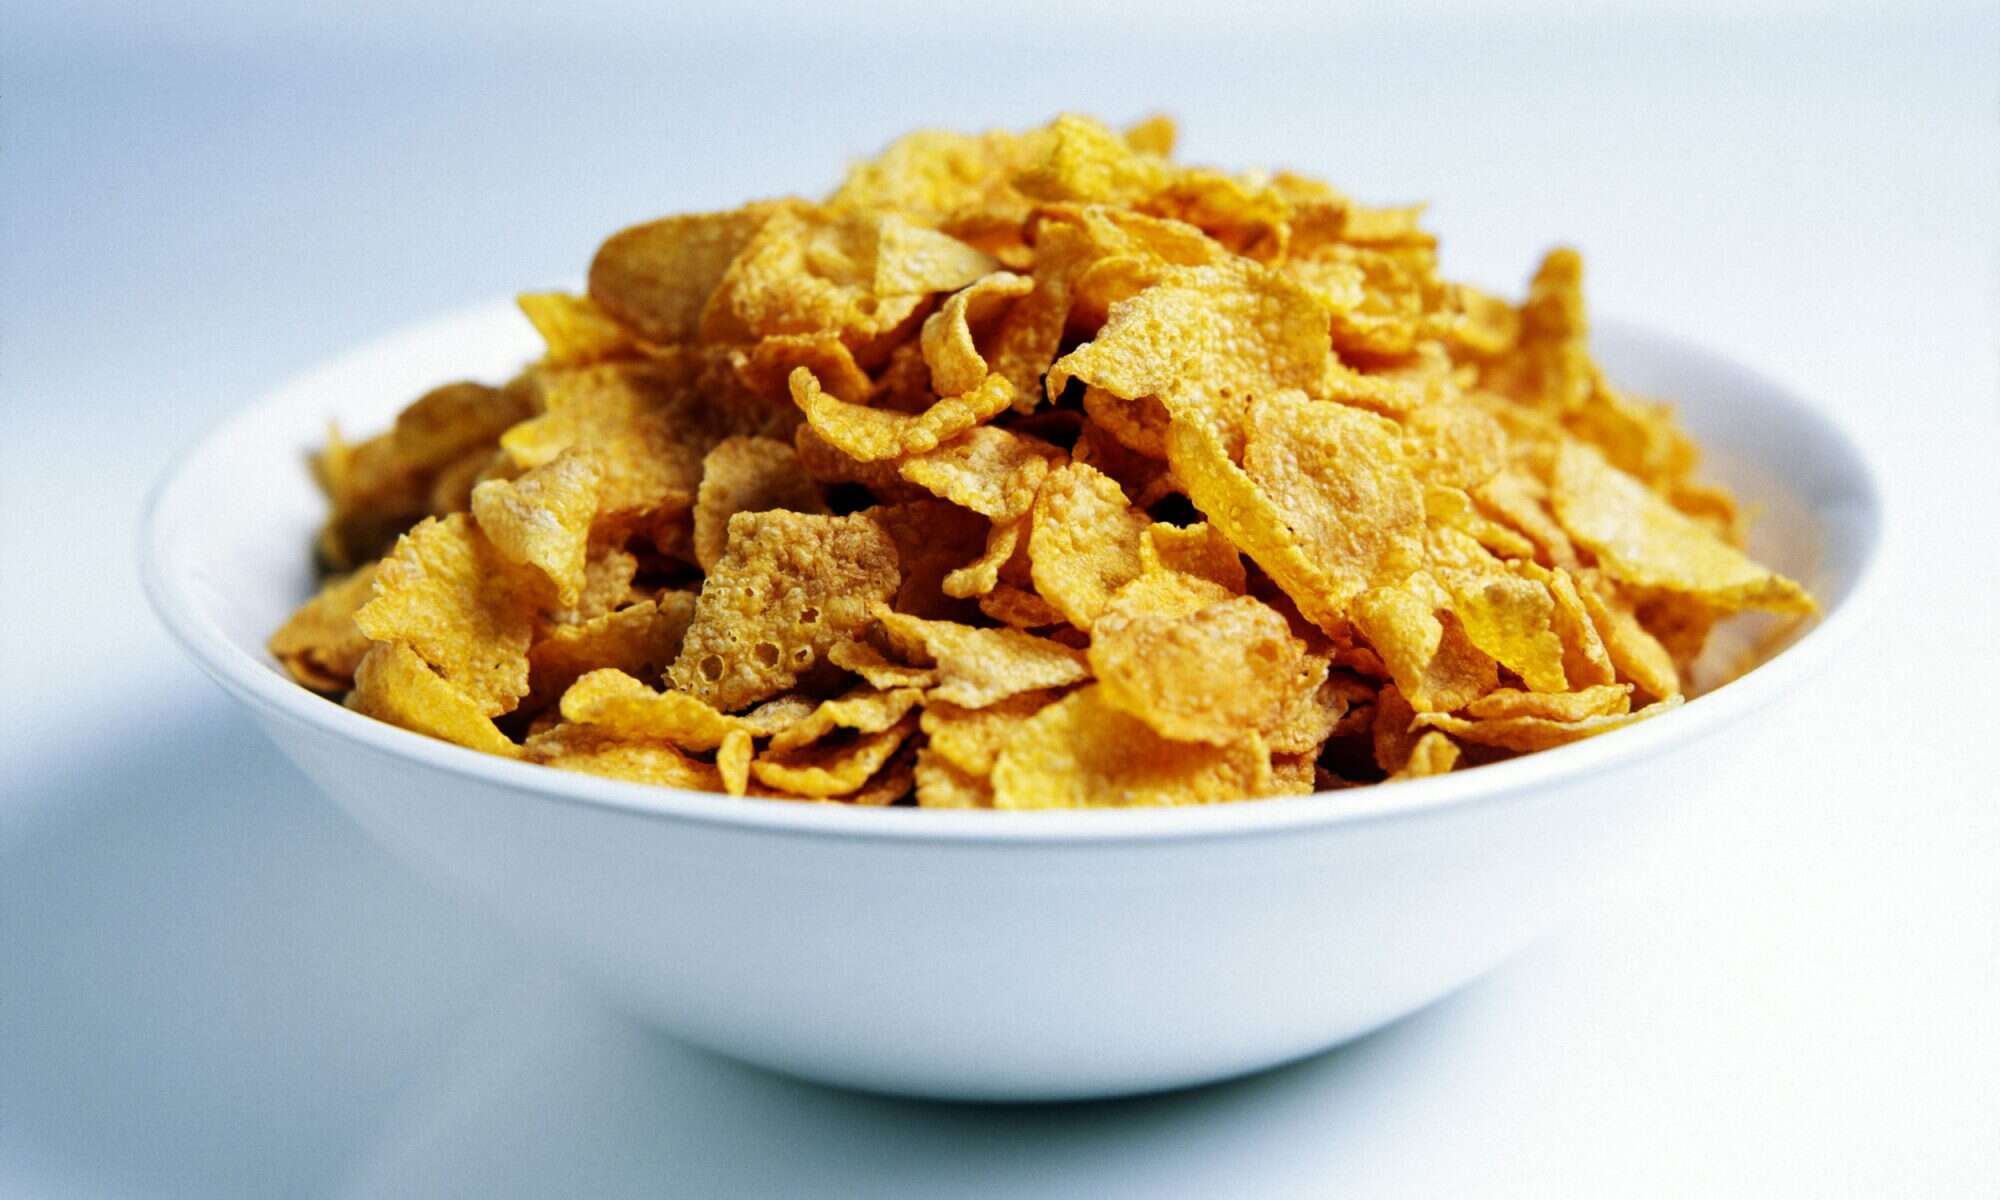 Do You Microwave Your Corn Flakes?